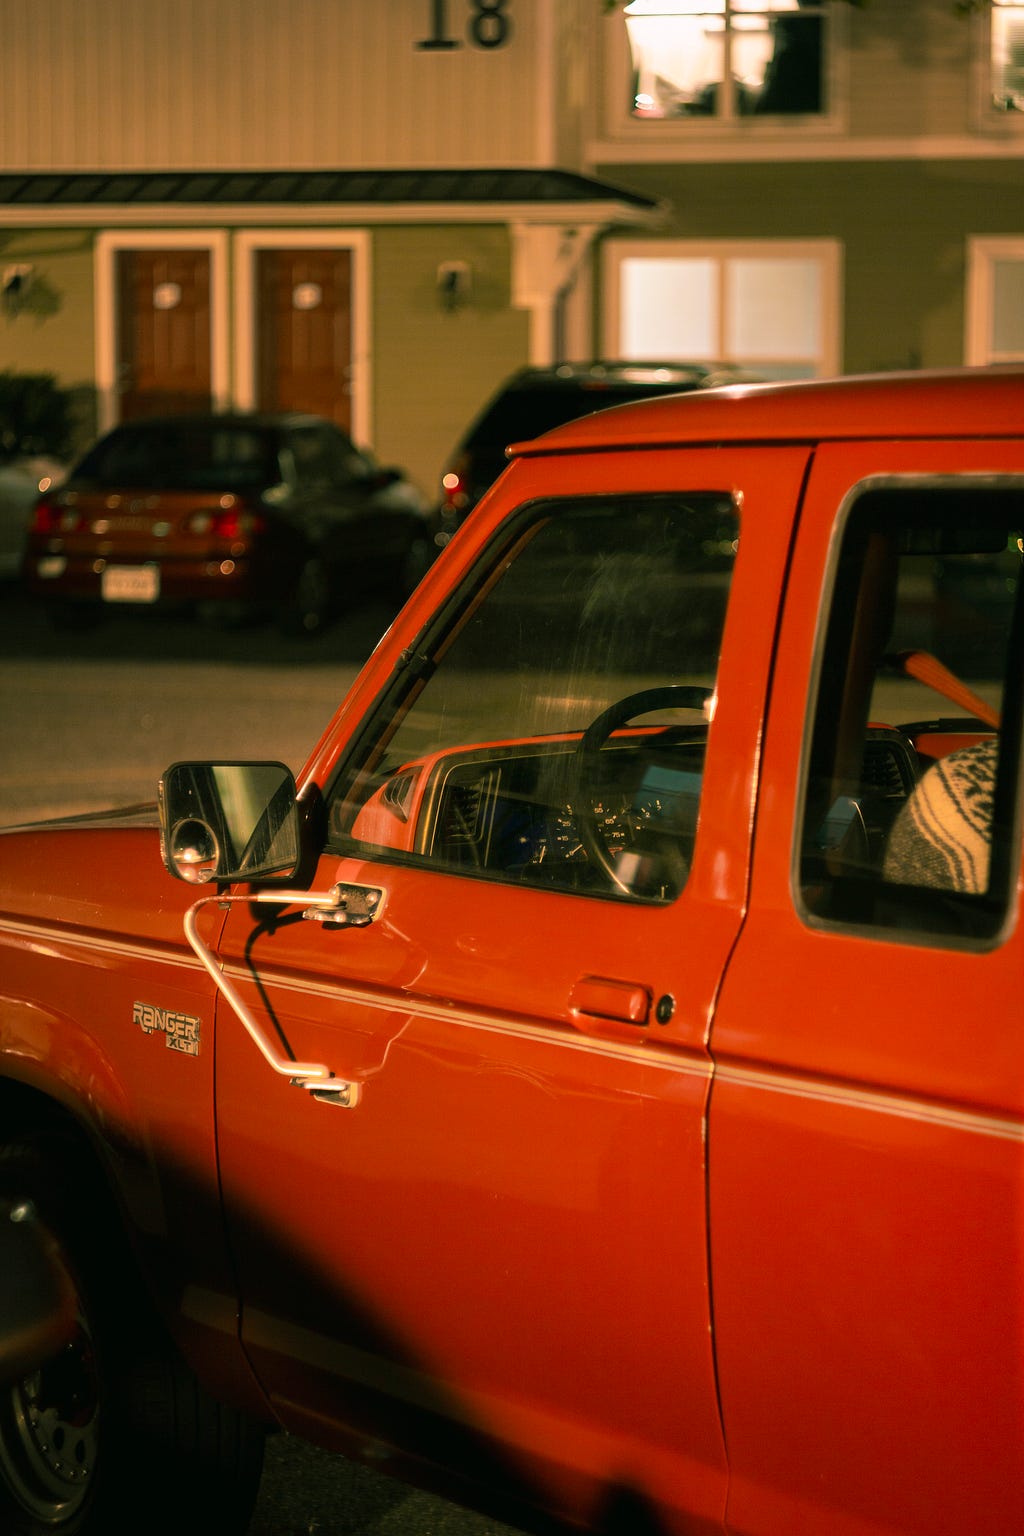 tightly-framed photo of an old red pickup truck late at night